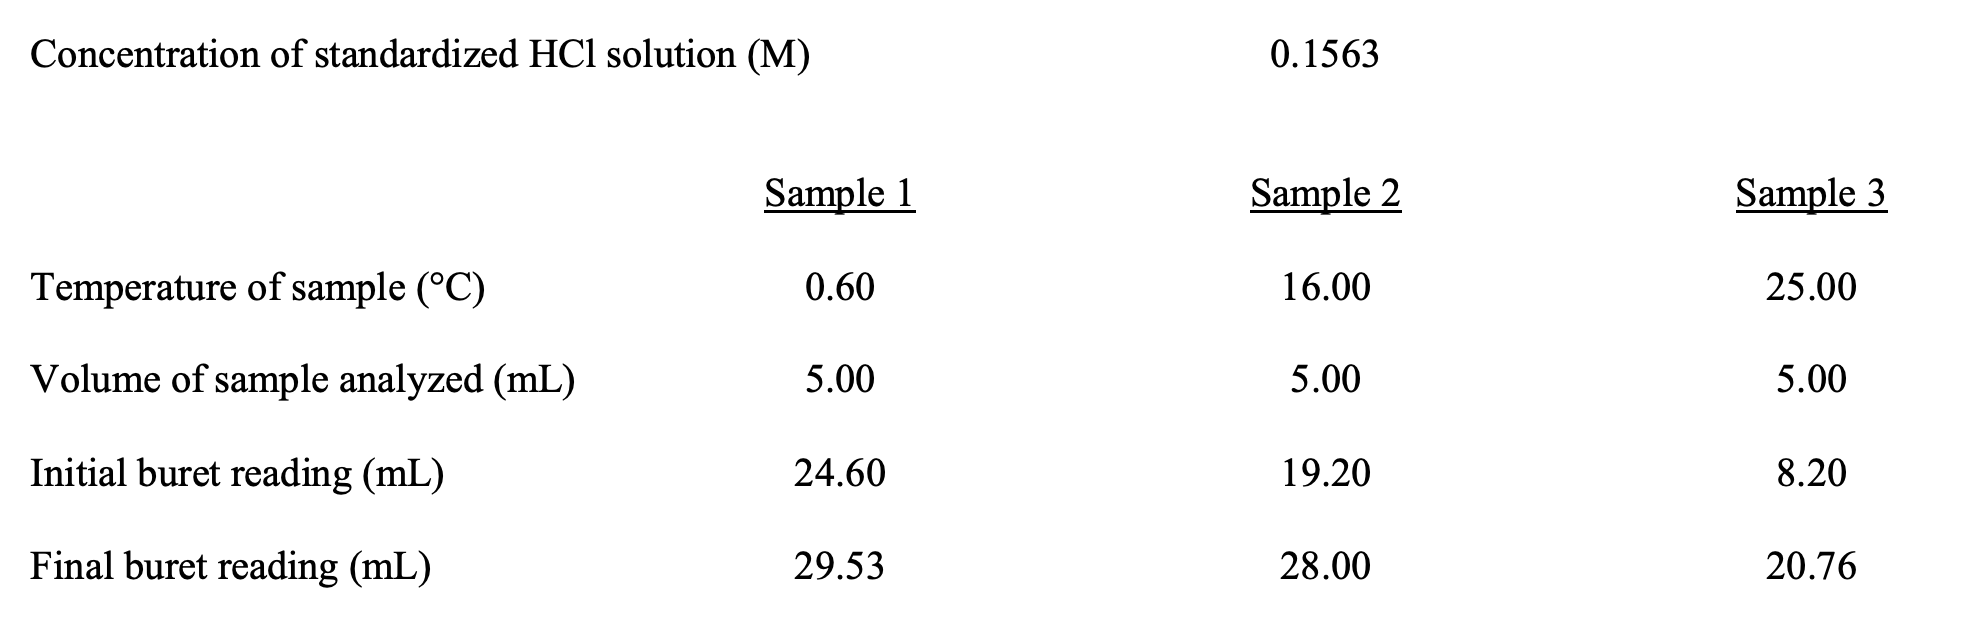 Concentration of standardized HCl solution (M)
0.1563
Sample 1
Sample 2
Sample 3
Temperature of sample (°C)
0.60
16.00
25.00
Volume of sample analyzed (mL)
5.00
5.00
5.00
Initial buret reading (mL)
24.60
19.20
8.20
Final buret reading (mL)
29.53
28.00
20.76
